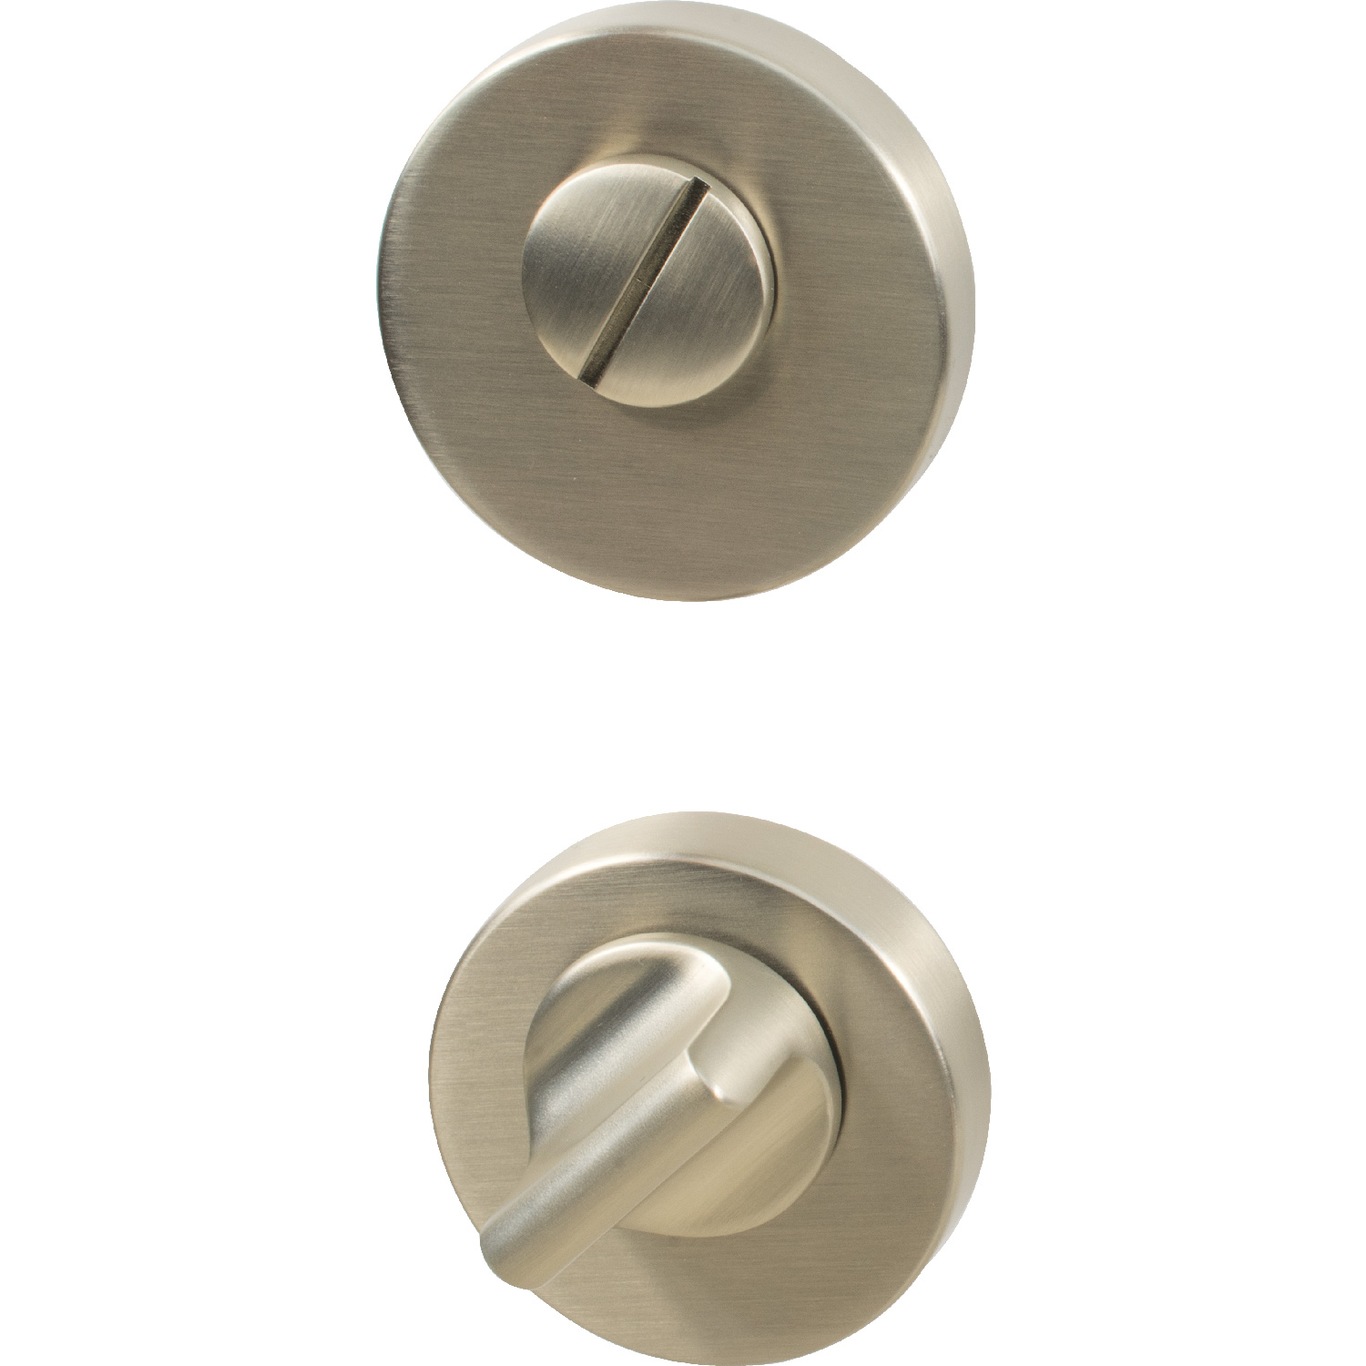 Thumb Turn R-52 for Helix and Tavira, Stainless Steel